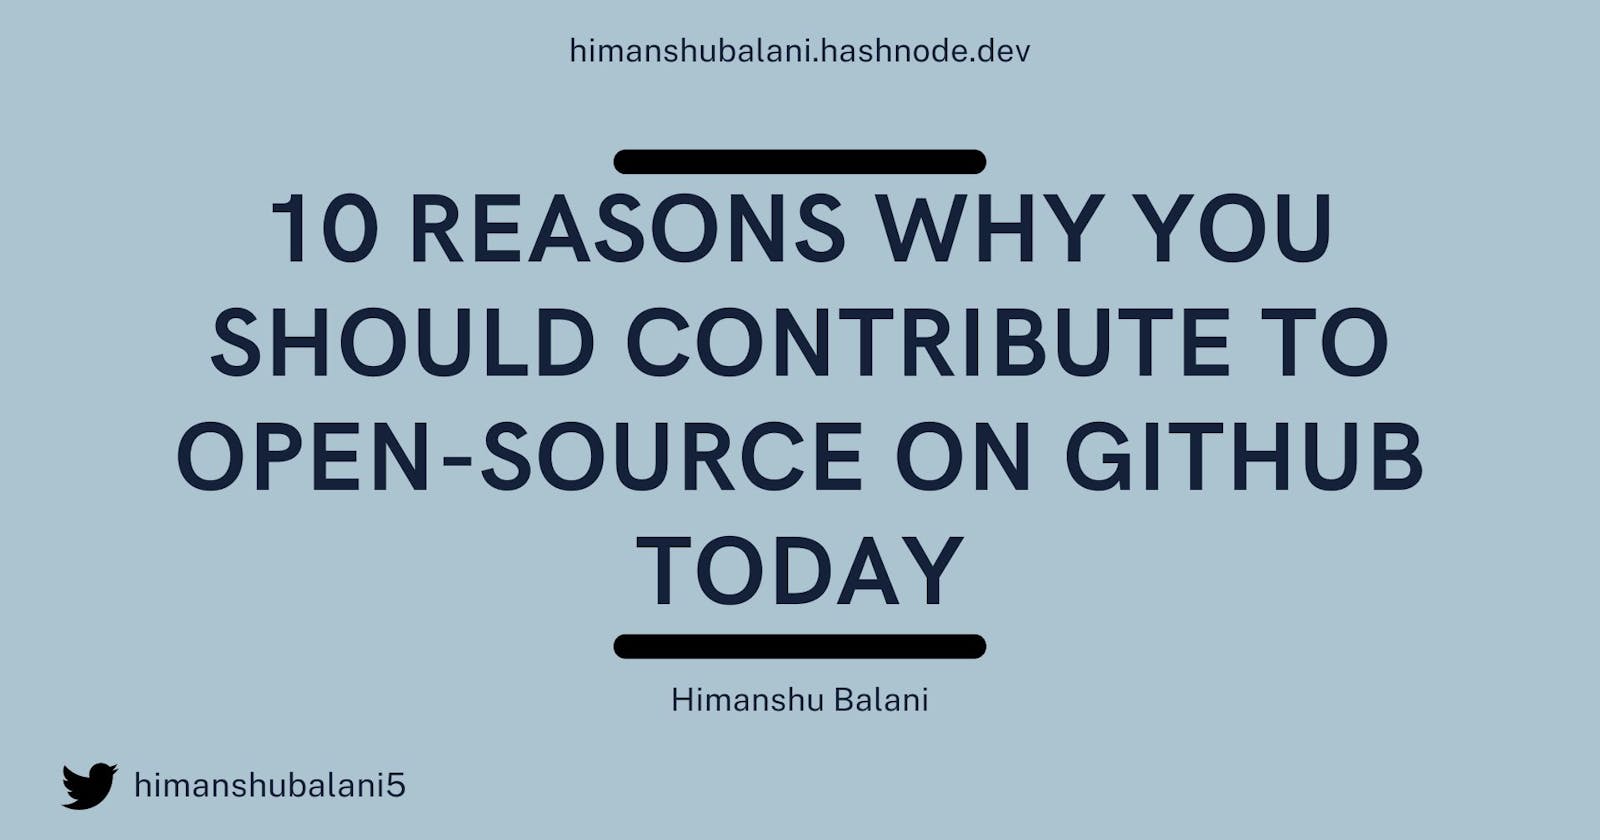 10 Reasons why you should contribute to Open-Source on GitHub today